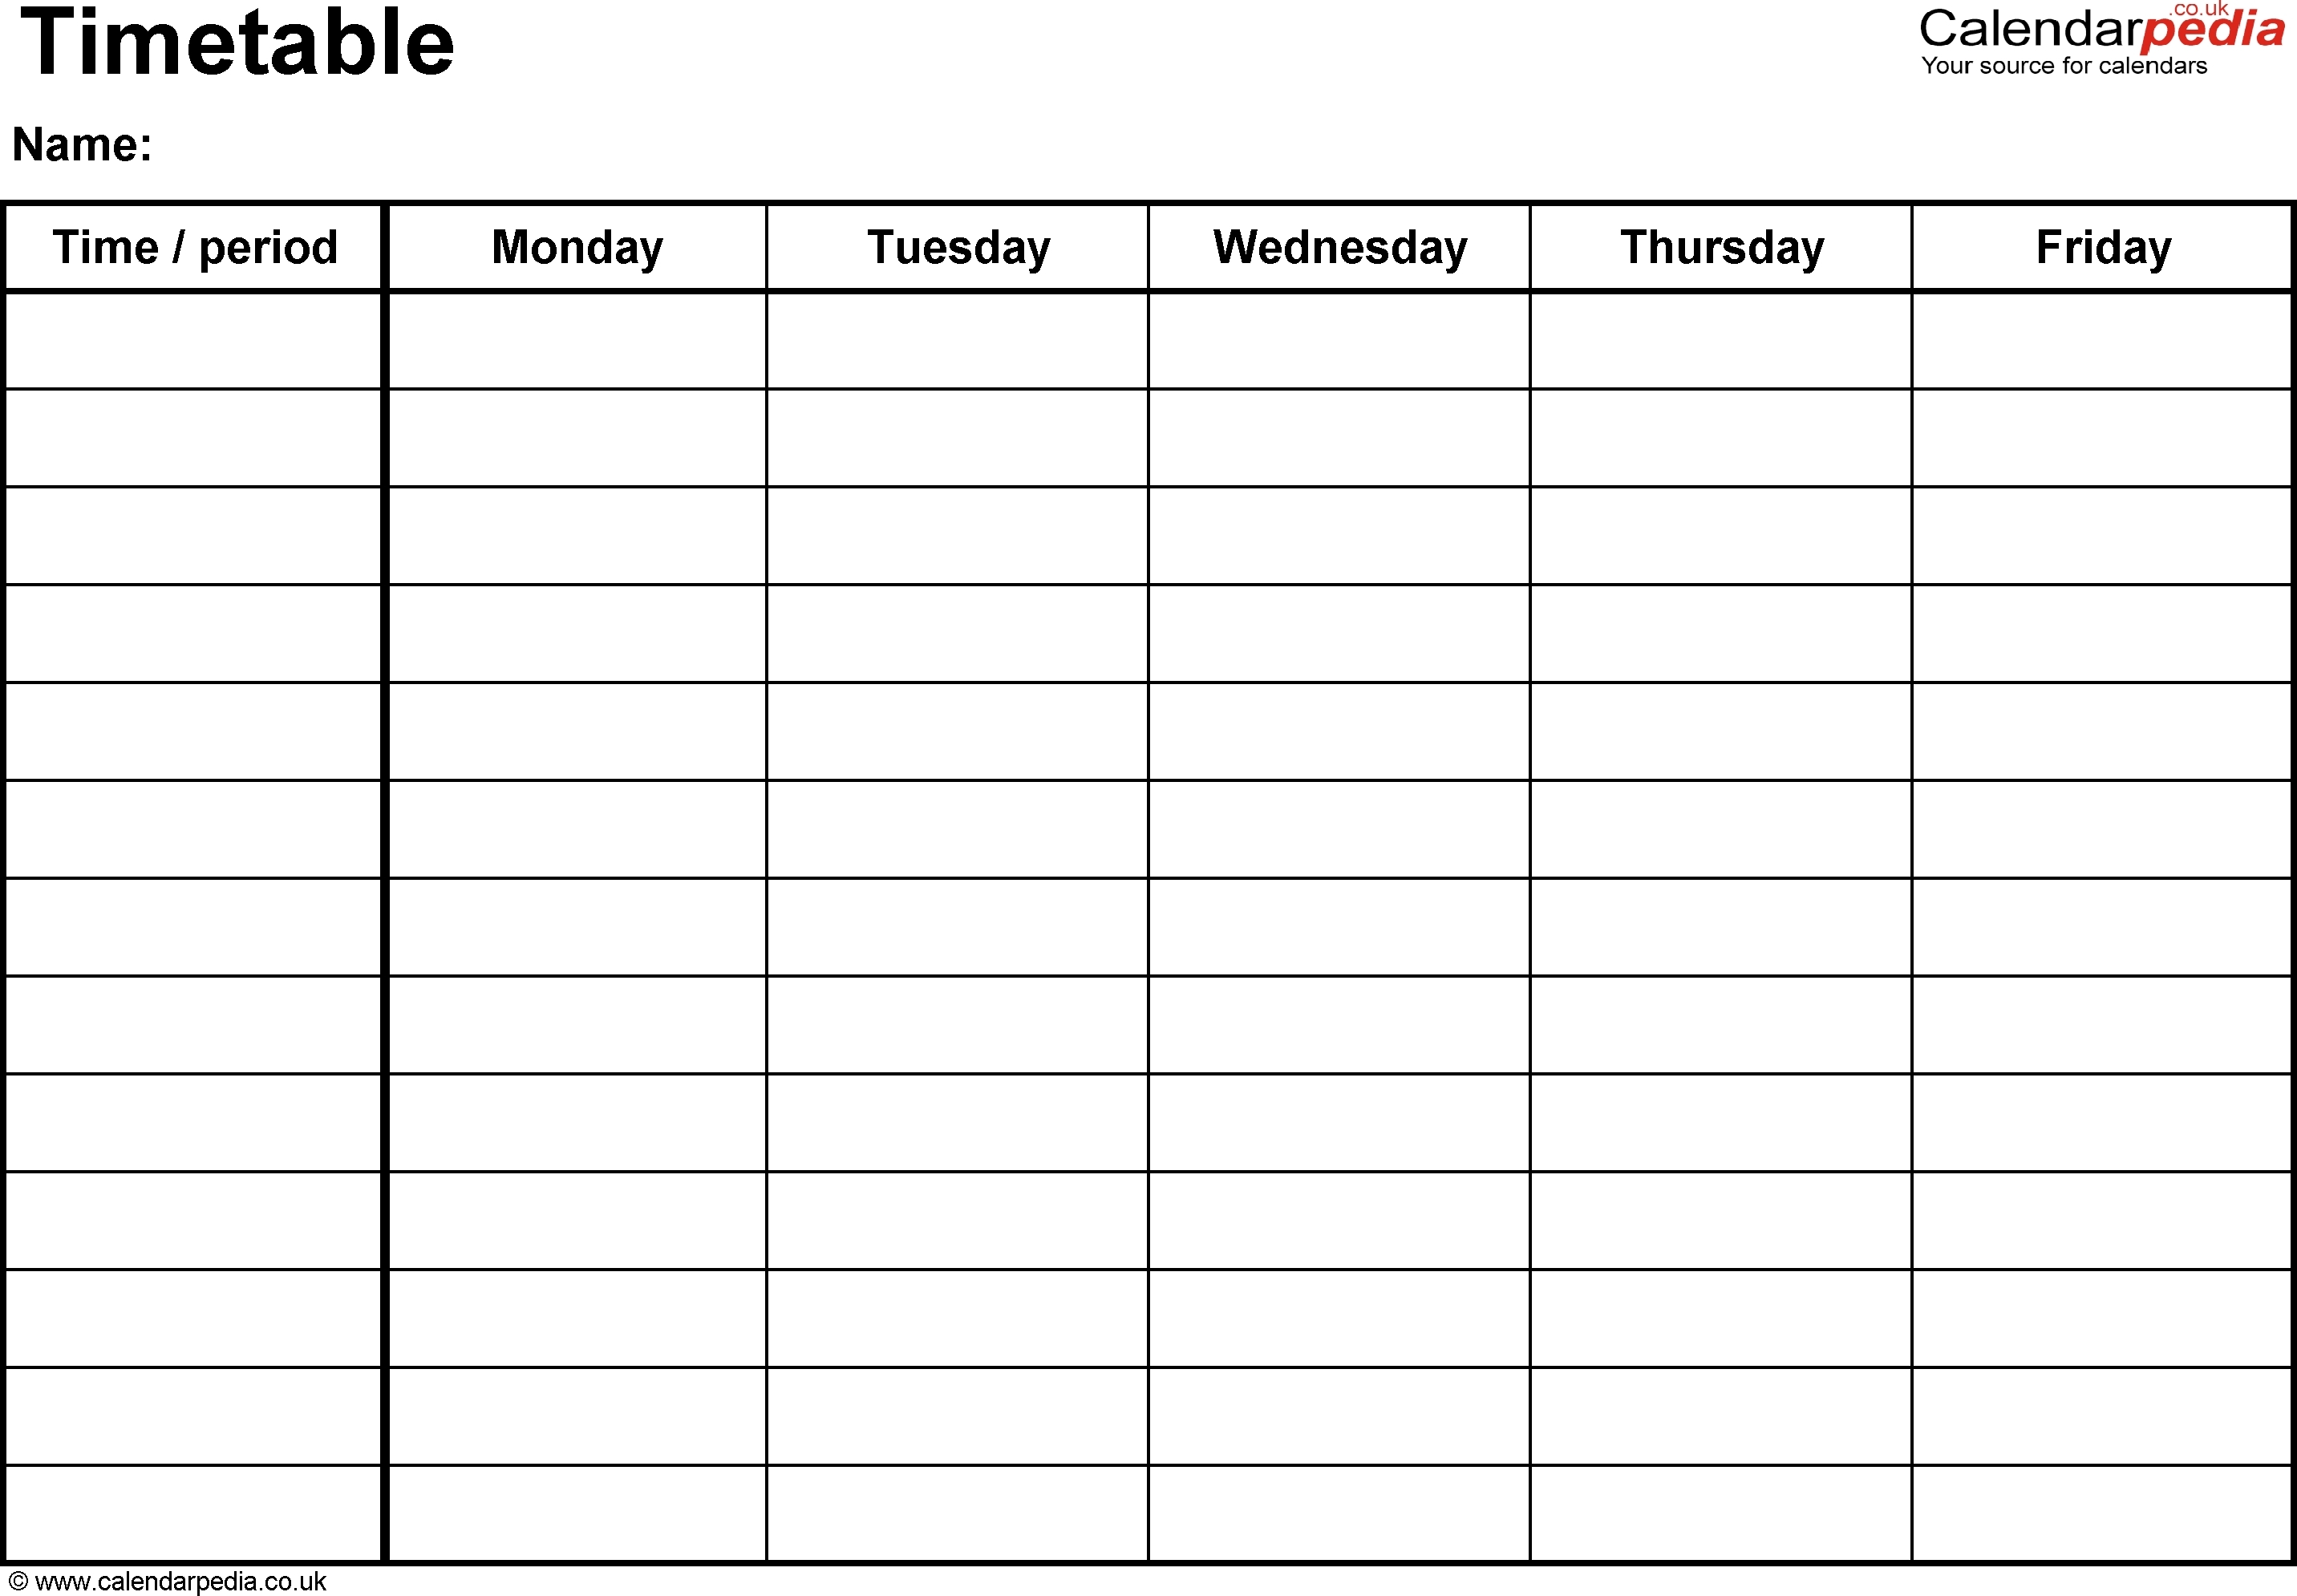 Monday To Friday Timetable Template | Calendar Printing Example-Template For Monday To Friday